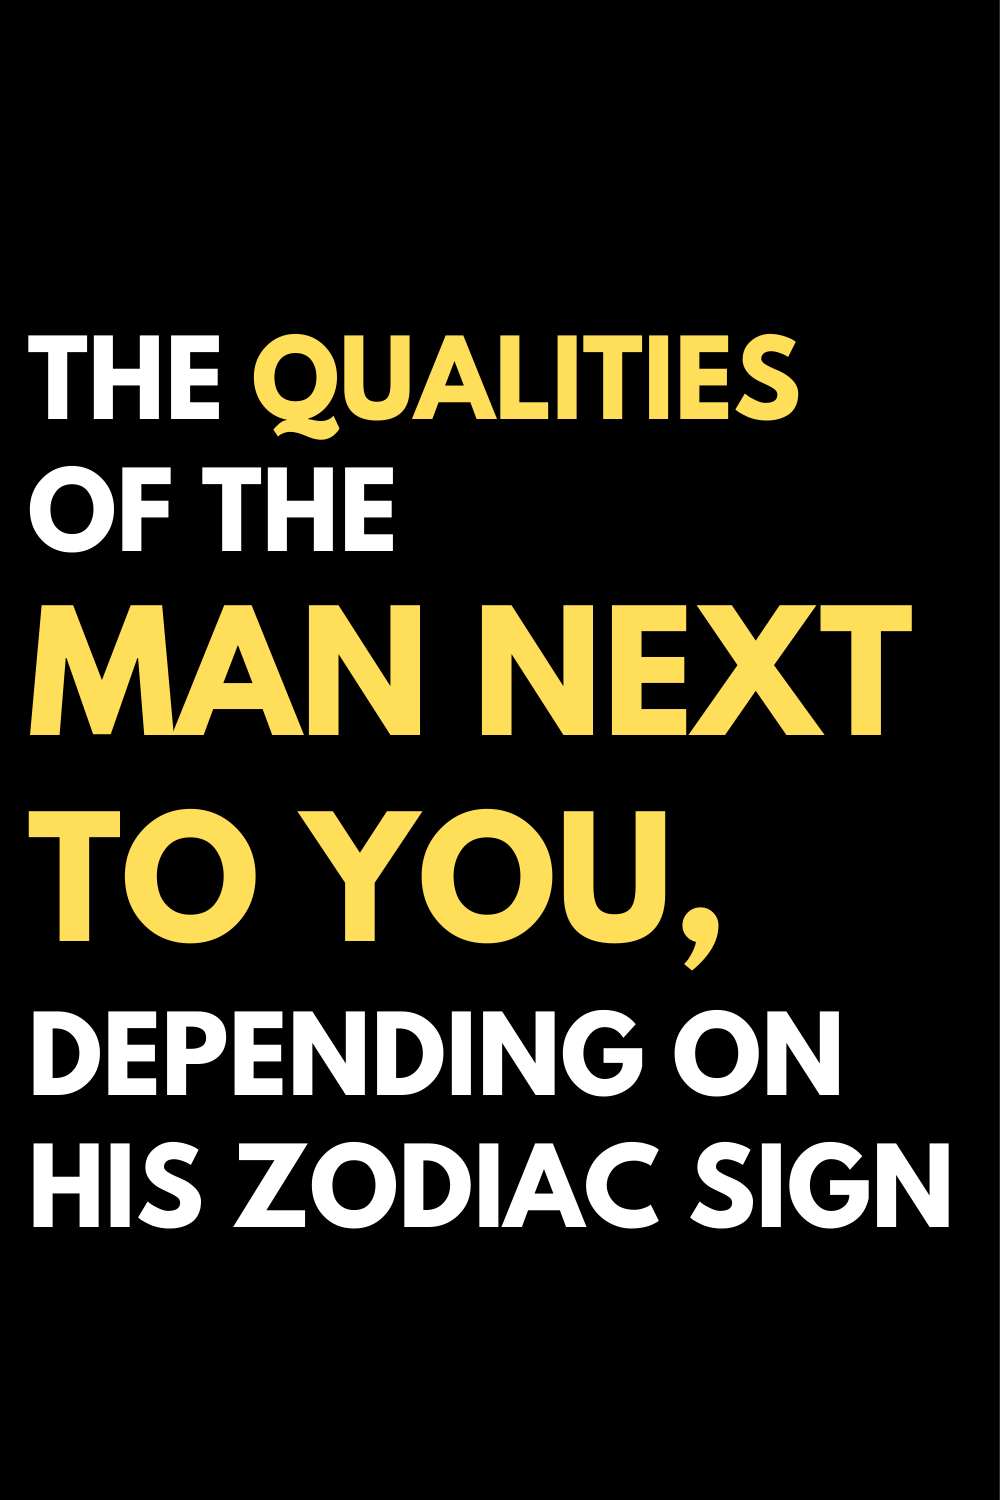 The qualities of the man next to you, depending on his zodiac sign